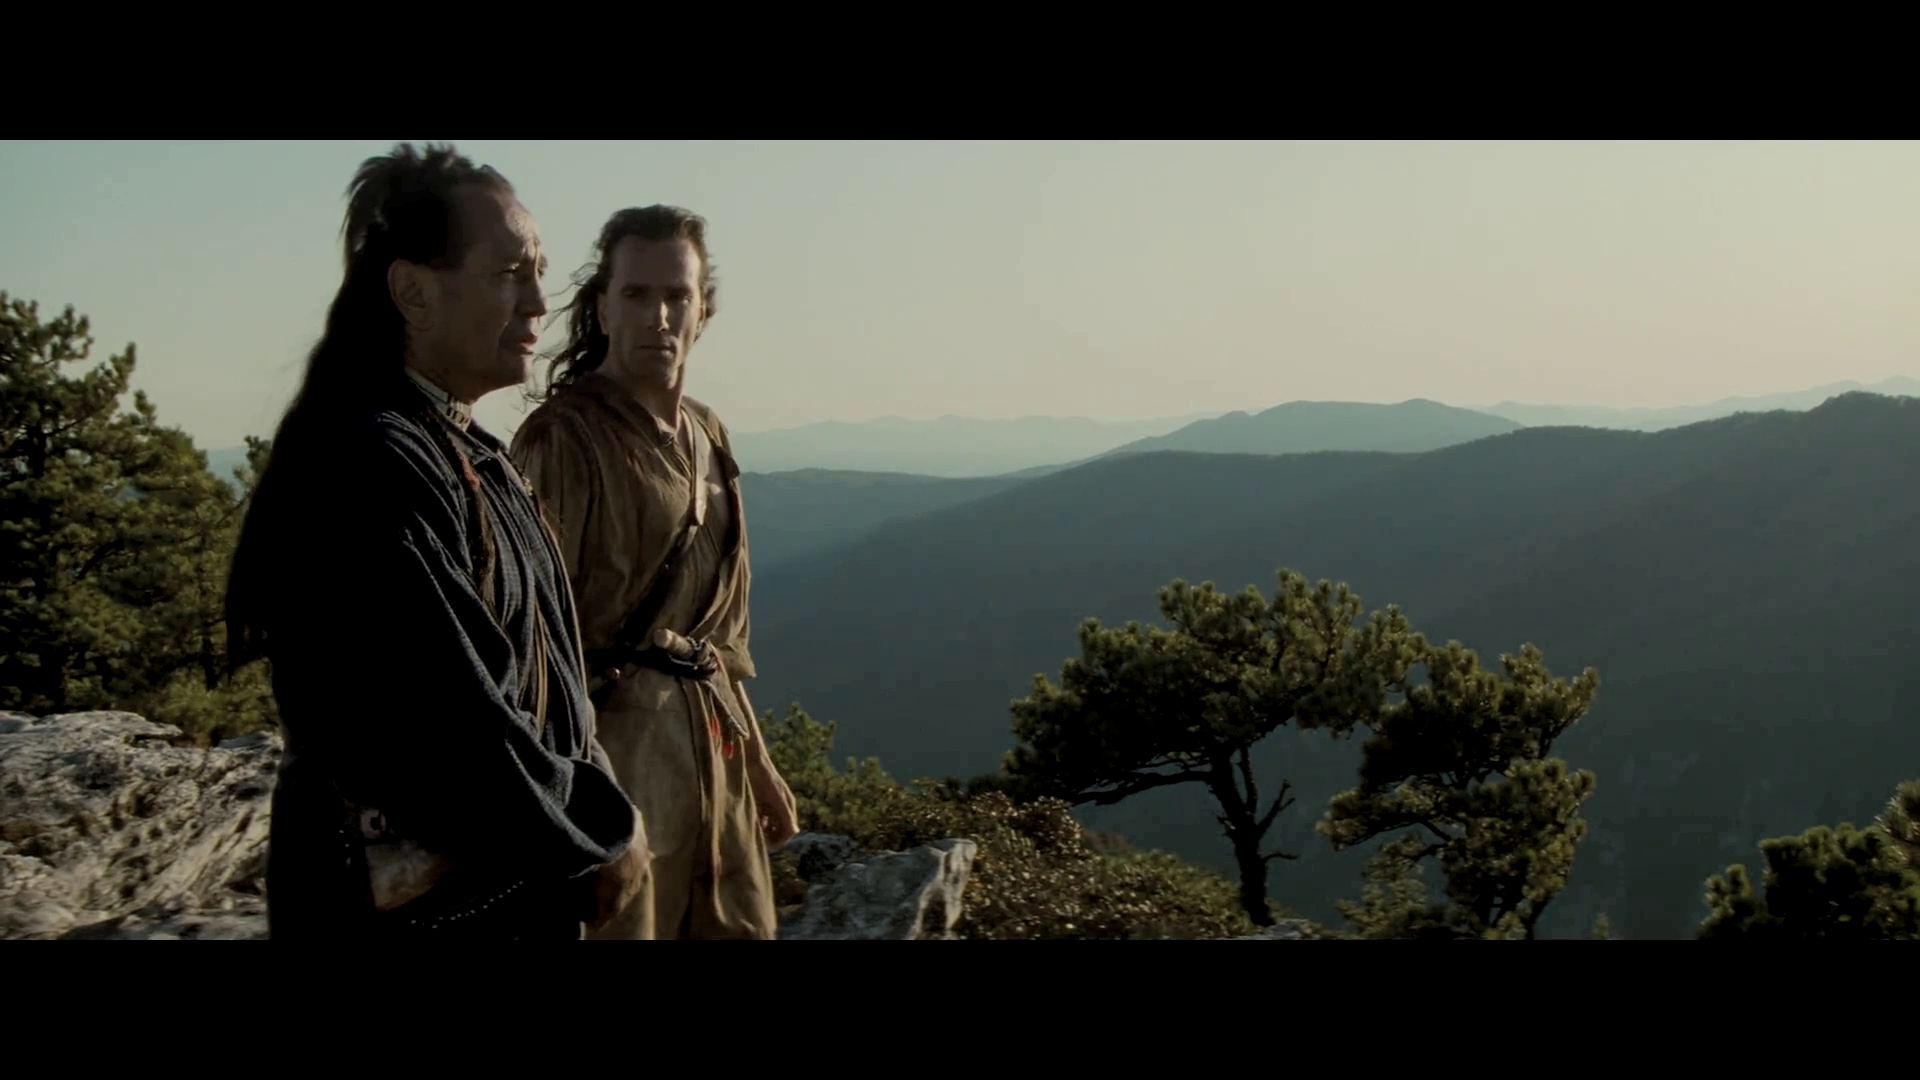 Thoughts on “The Last of the Mohicans” 